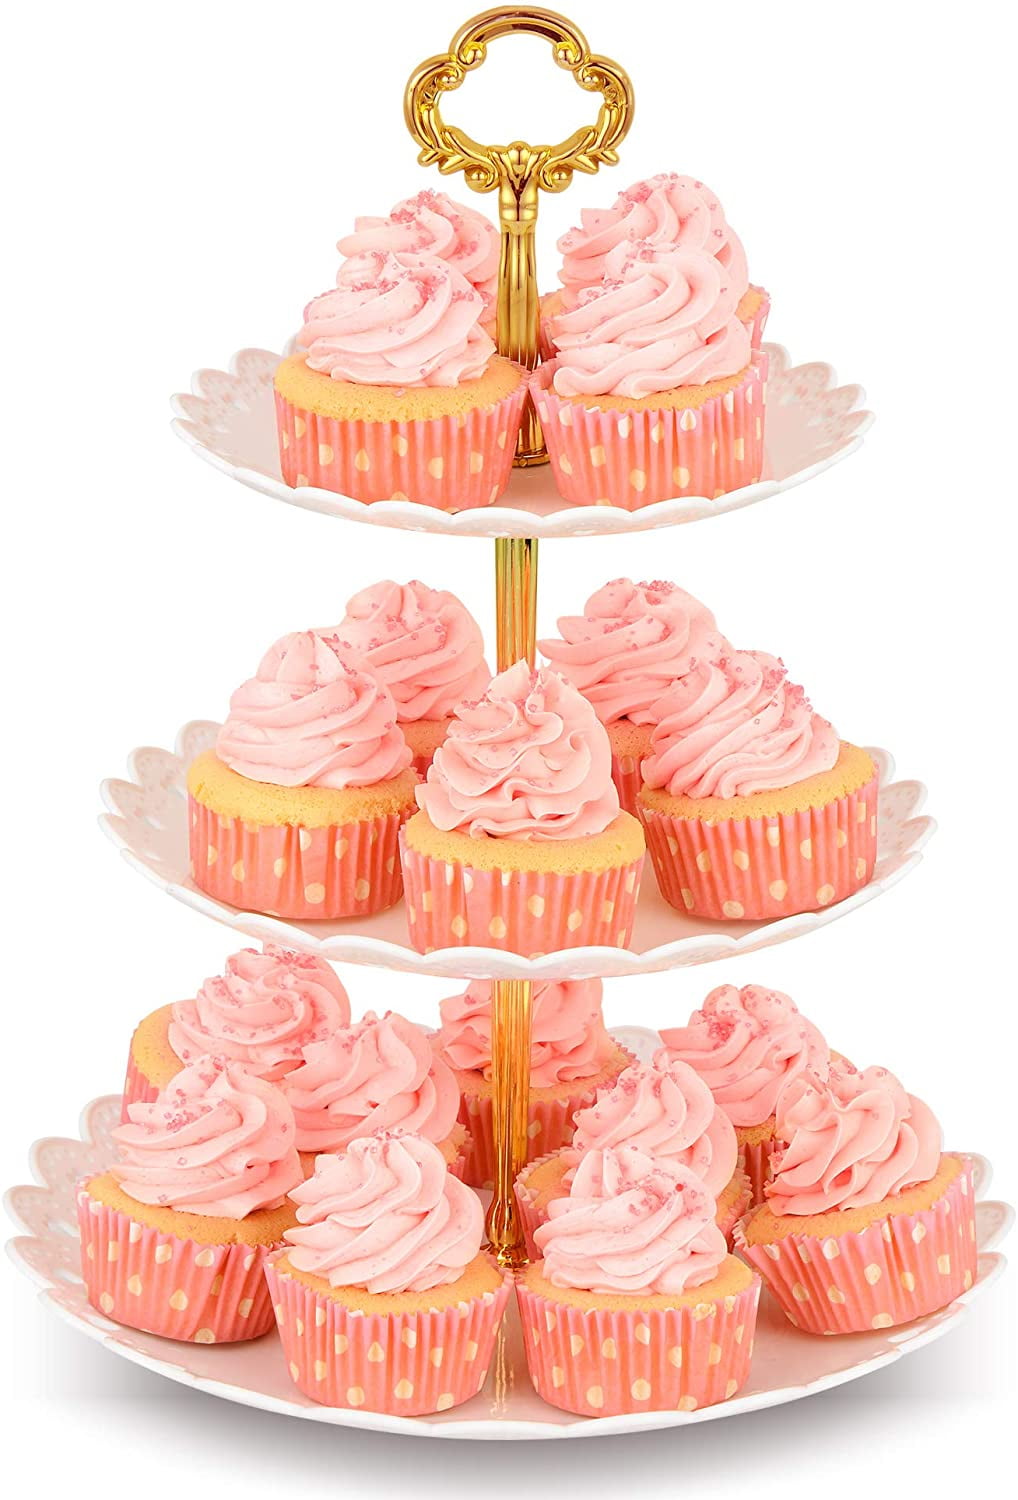 AMMAKE Dessert Plates Mini Cakes Fruit Candy Display Tower for Birthday Tea Party Baby Shower Serving Tray Premium Cupcake Stand/ 3 Tier Wooden Cake Holder